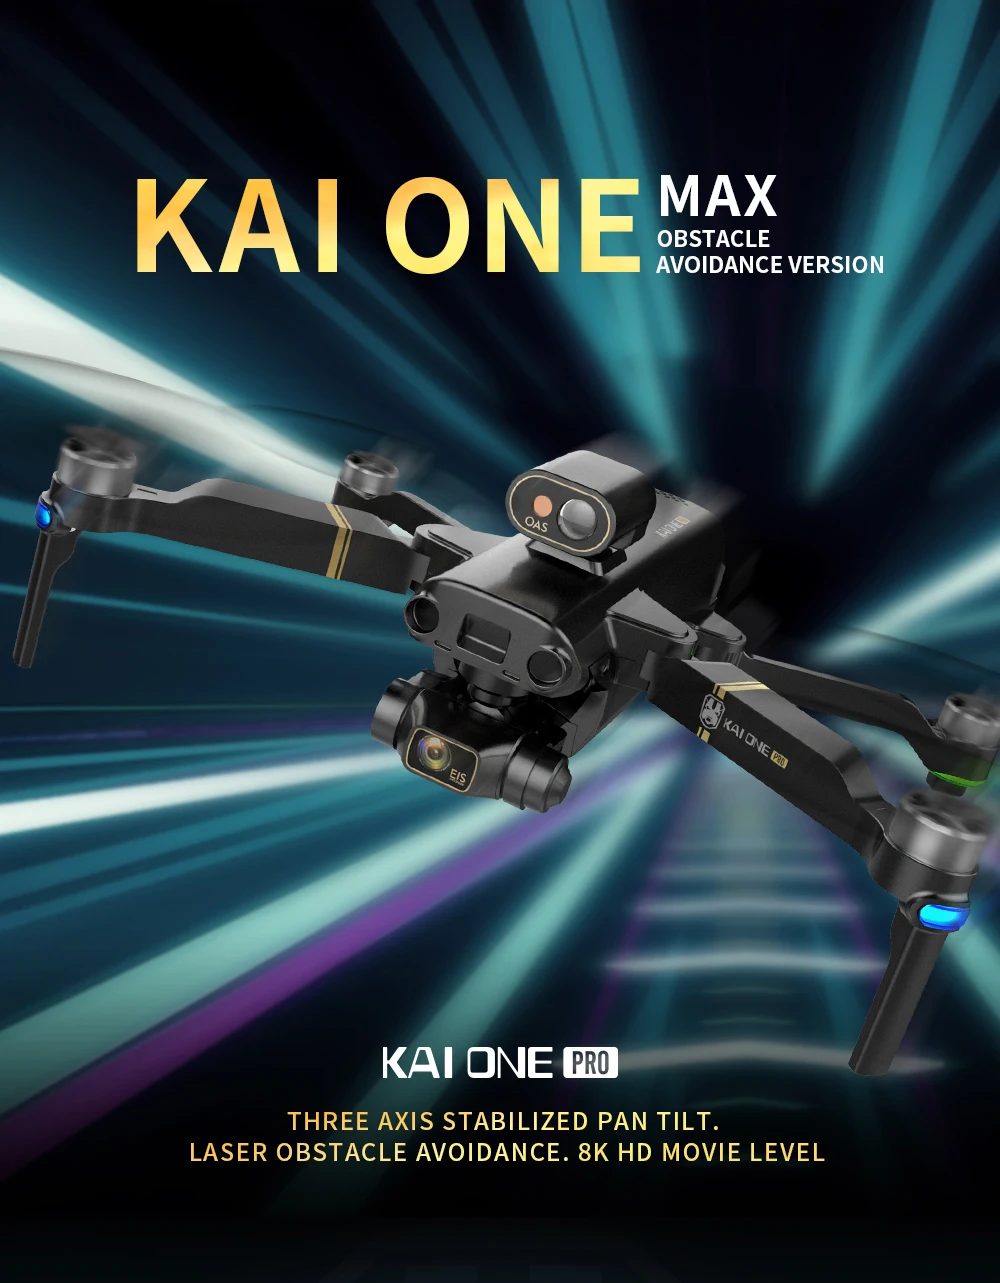 Updated KAI ONE MAX Drone 8K Camera 3-Axis Gimbal Anti-Shake Laser obstacle avoidance Brushless Foldable Quadcopter Drone